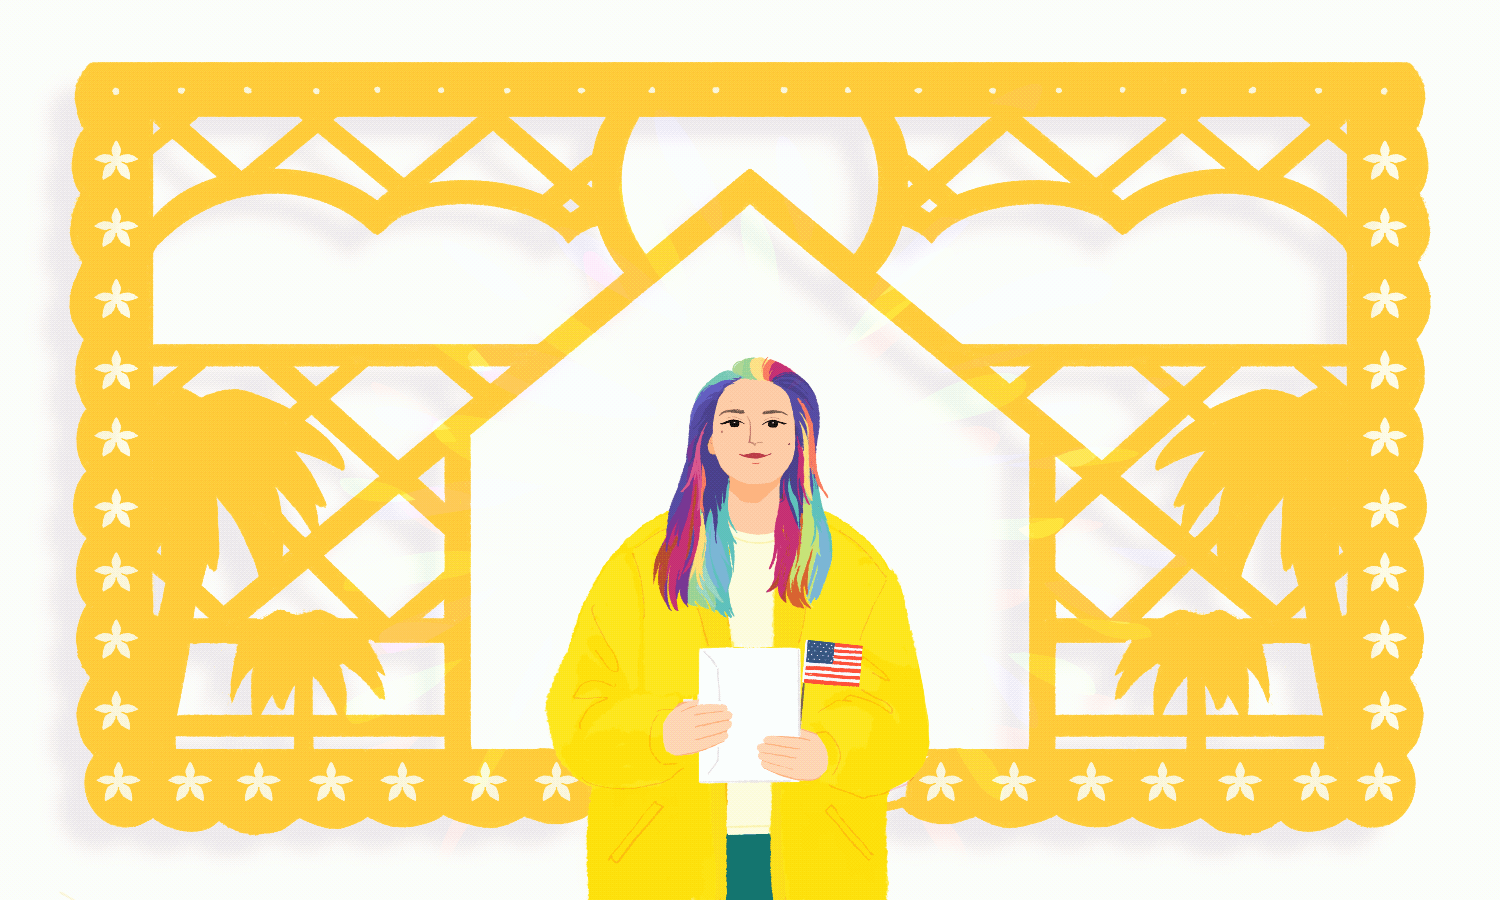 Centered in the illustration is Aura smiling holding a large white envelope and a small American flag. She is wearing brightly colored clothes and has rainbow dyed hair. Behind her is a large papel picado with cutouts depicting shapes of a house, palm trees, clouds, and the sun.